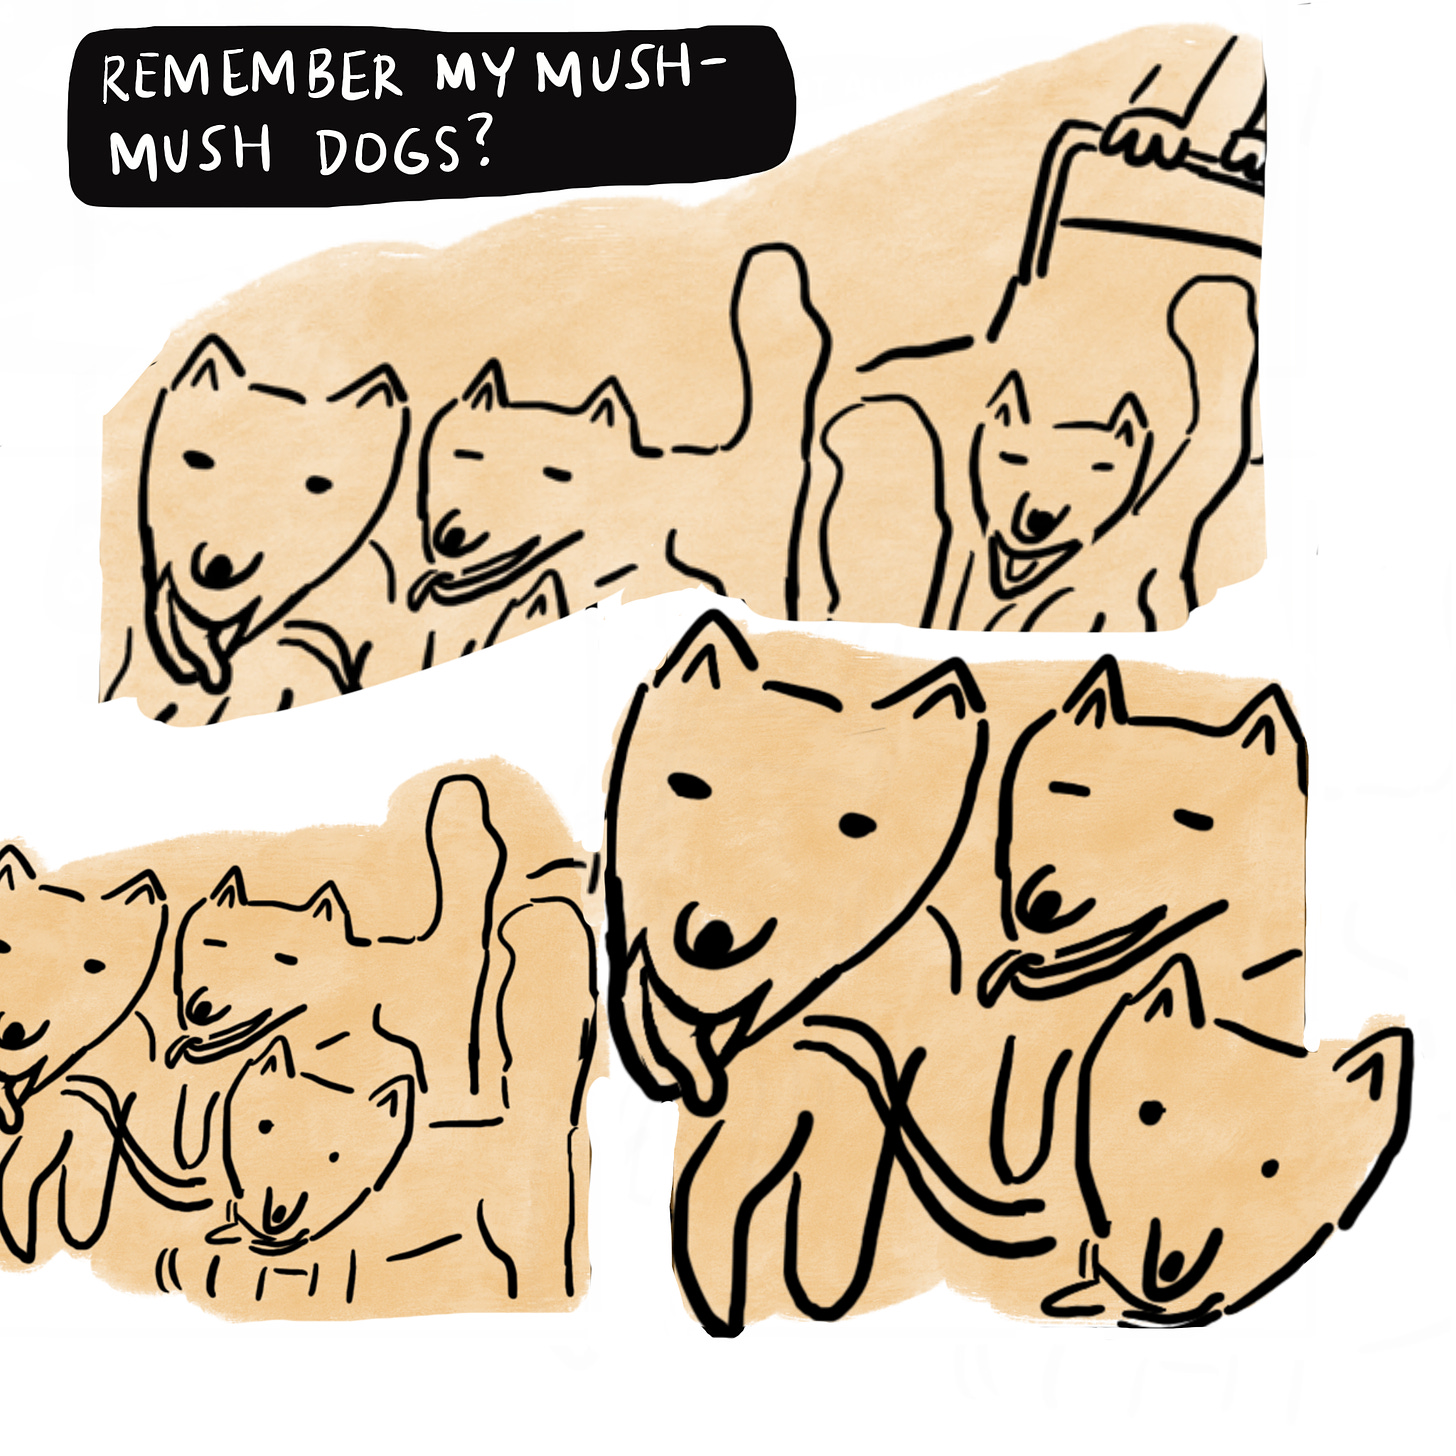 Images of sled dogs running with text that says "remember my mush-mush dogs?"